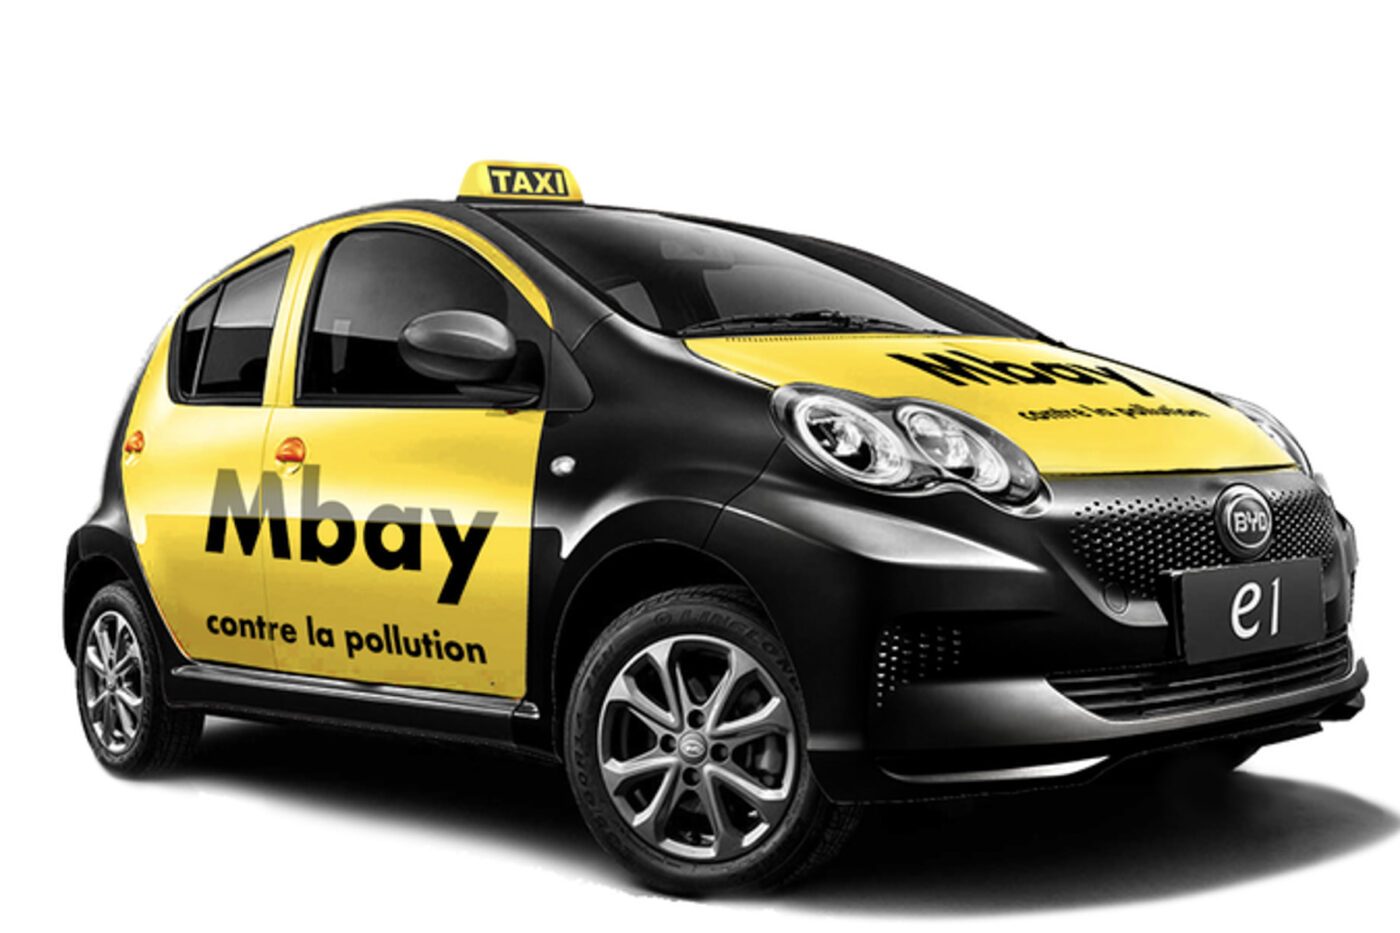 Mbay Mobility's Vision: Launching 33,000 Electric Taxis in West Africa Over 10 Years